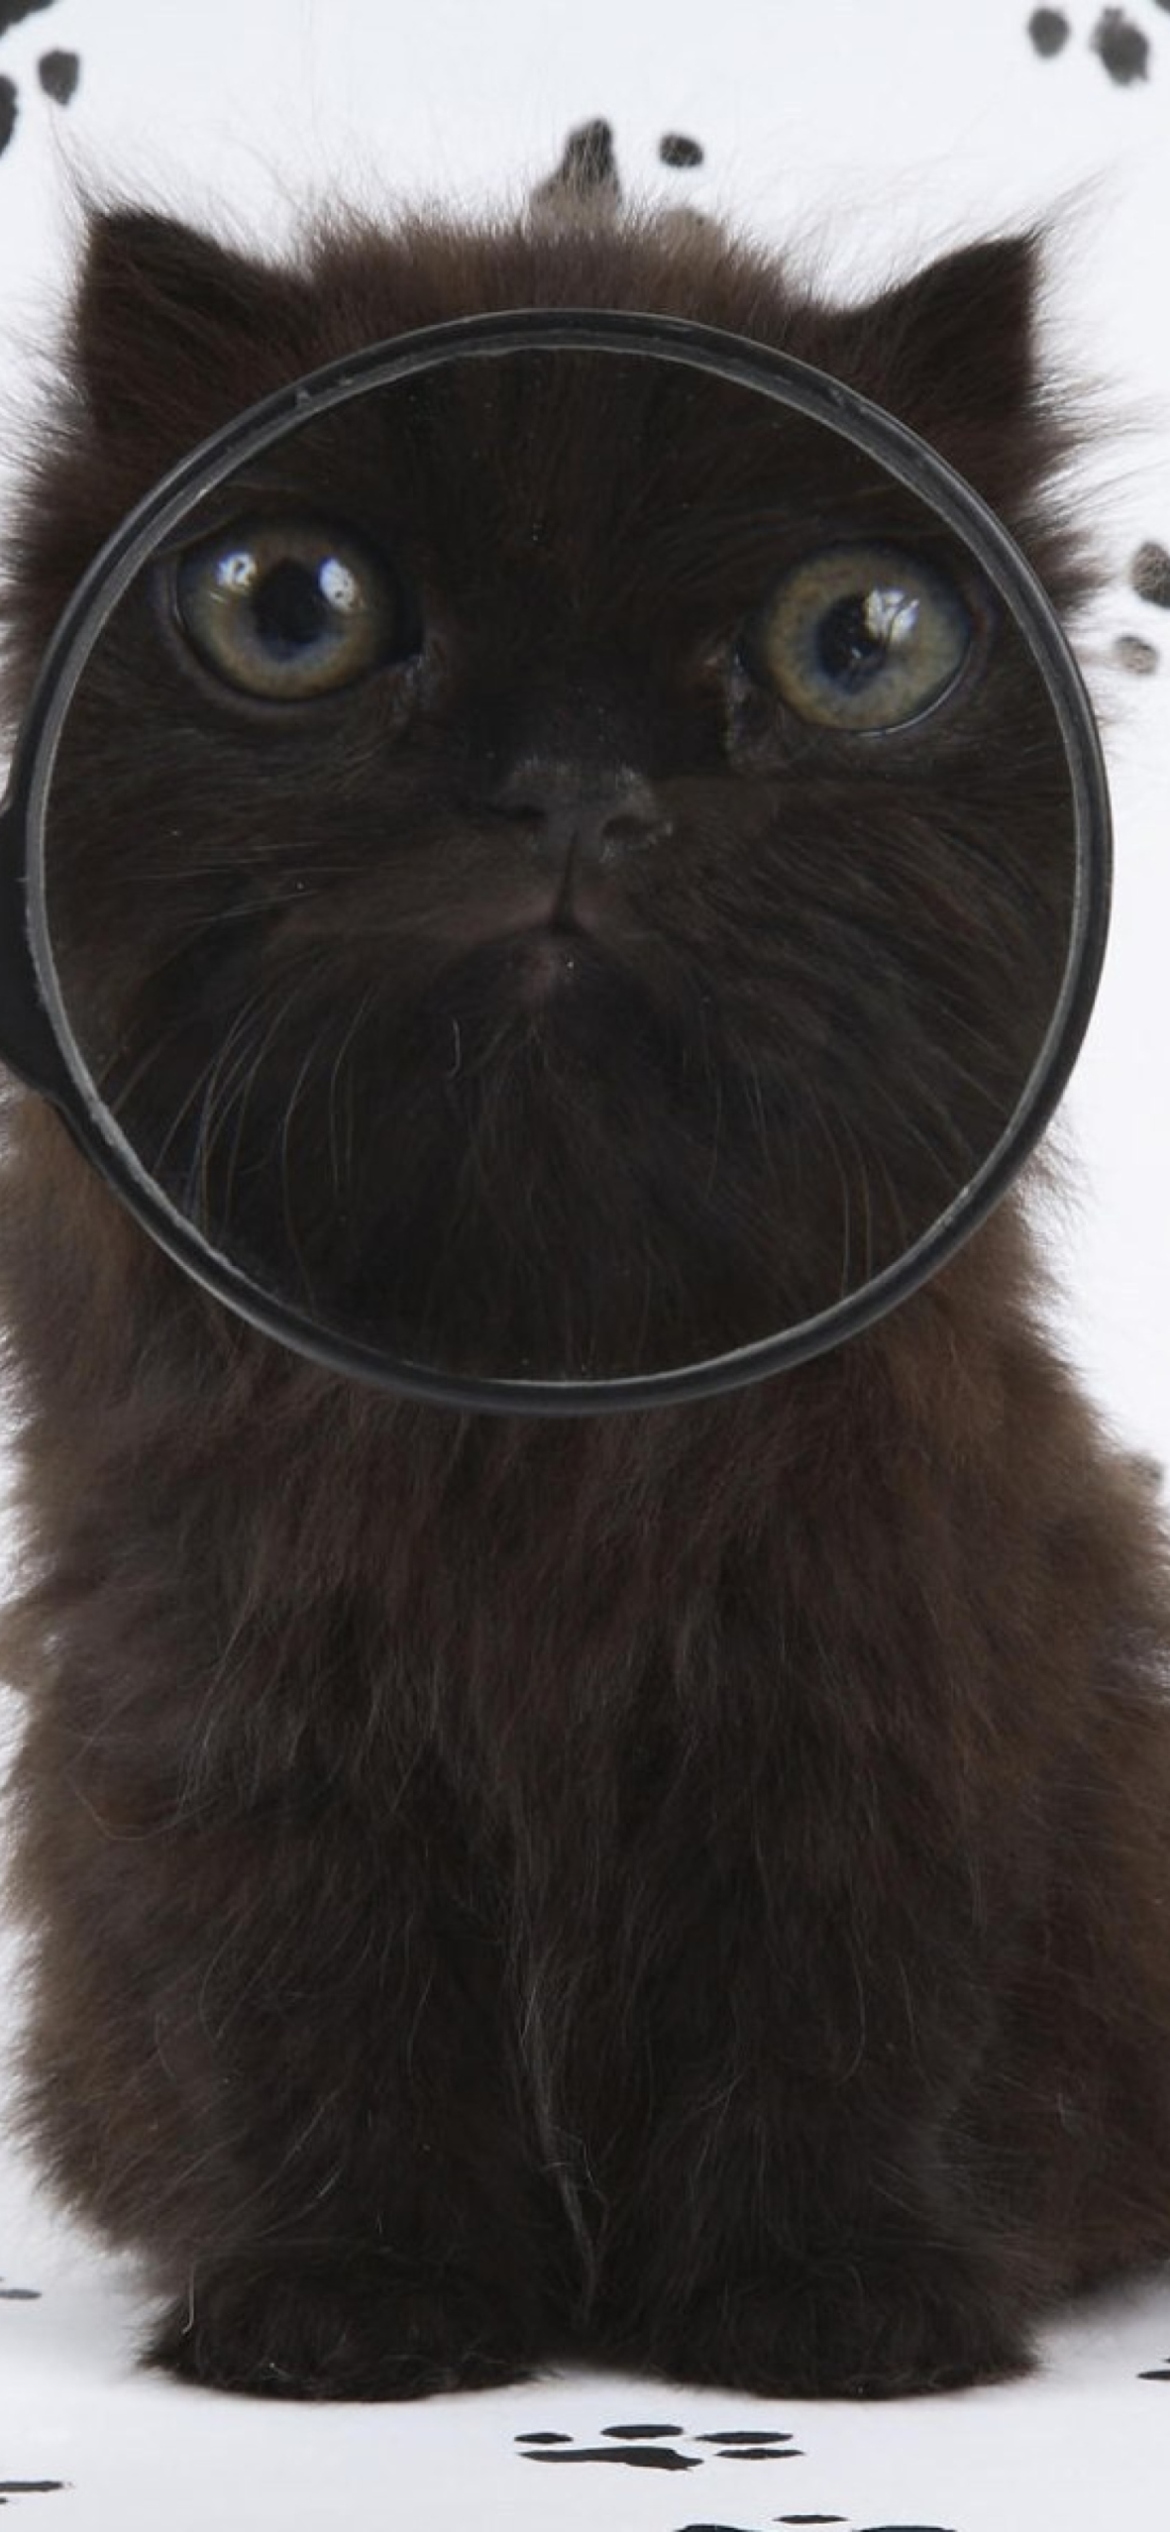 Cat And Magnifying Glass screenshot #1 1170x2532